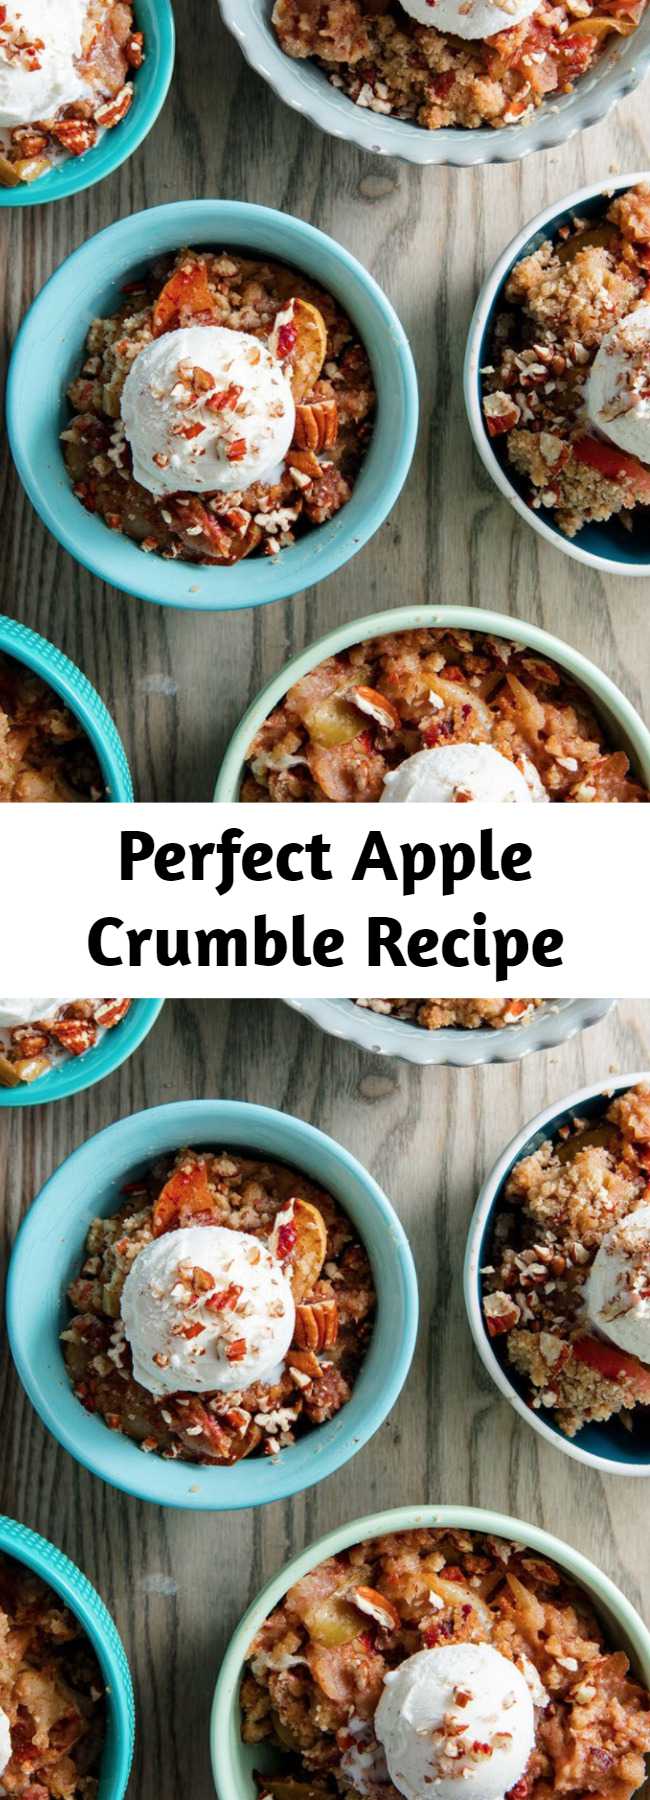 Perfect Apple Crumble Recipe - We love apple pie, but we're not so into making crust. Apple crumble is 1,000 times easier to make and, in our opinion, even better. The buttery pecan crumble is just too perfect, even without any oats. Below are our most helpful tips for making the perfect fall crumble. #easy #recipe #apple #crumble #dessert #baking #fall #brownsugar #pecans #pie #topping